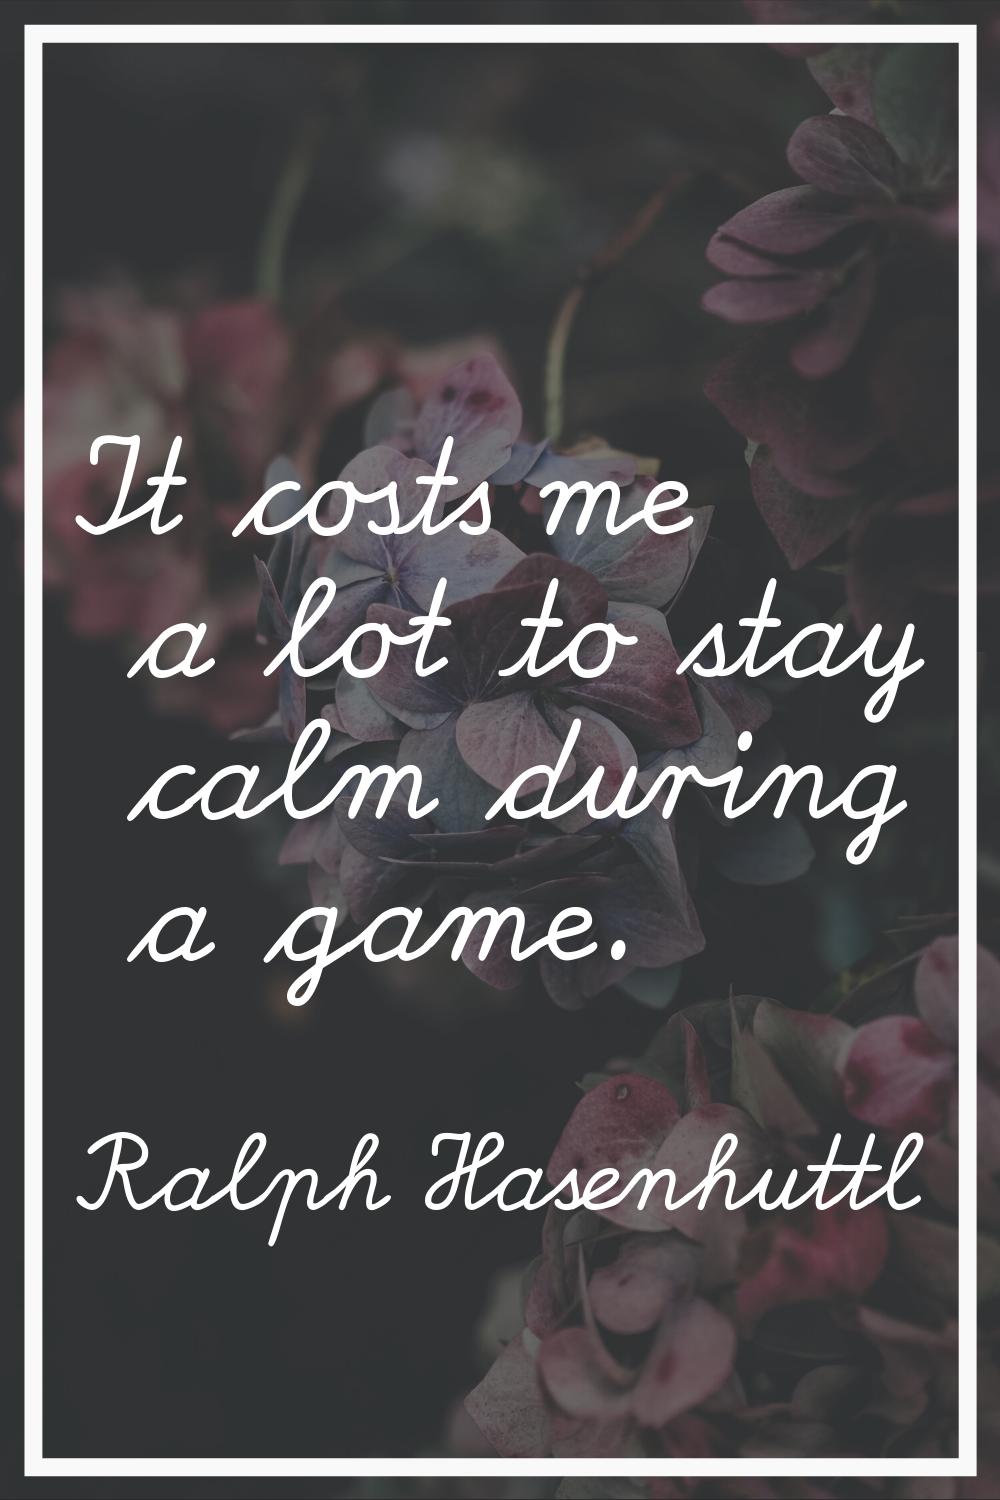 It costs me a lot to stay calm during a game.